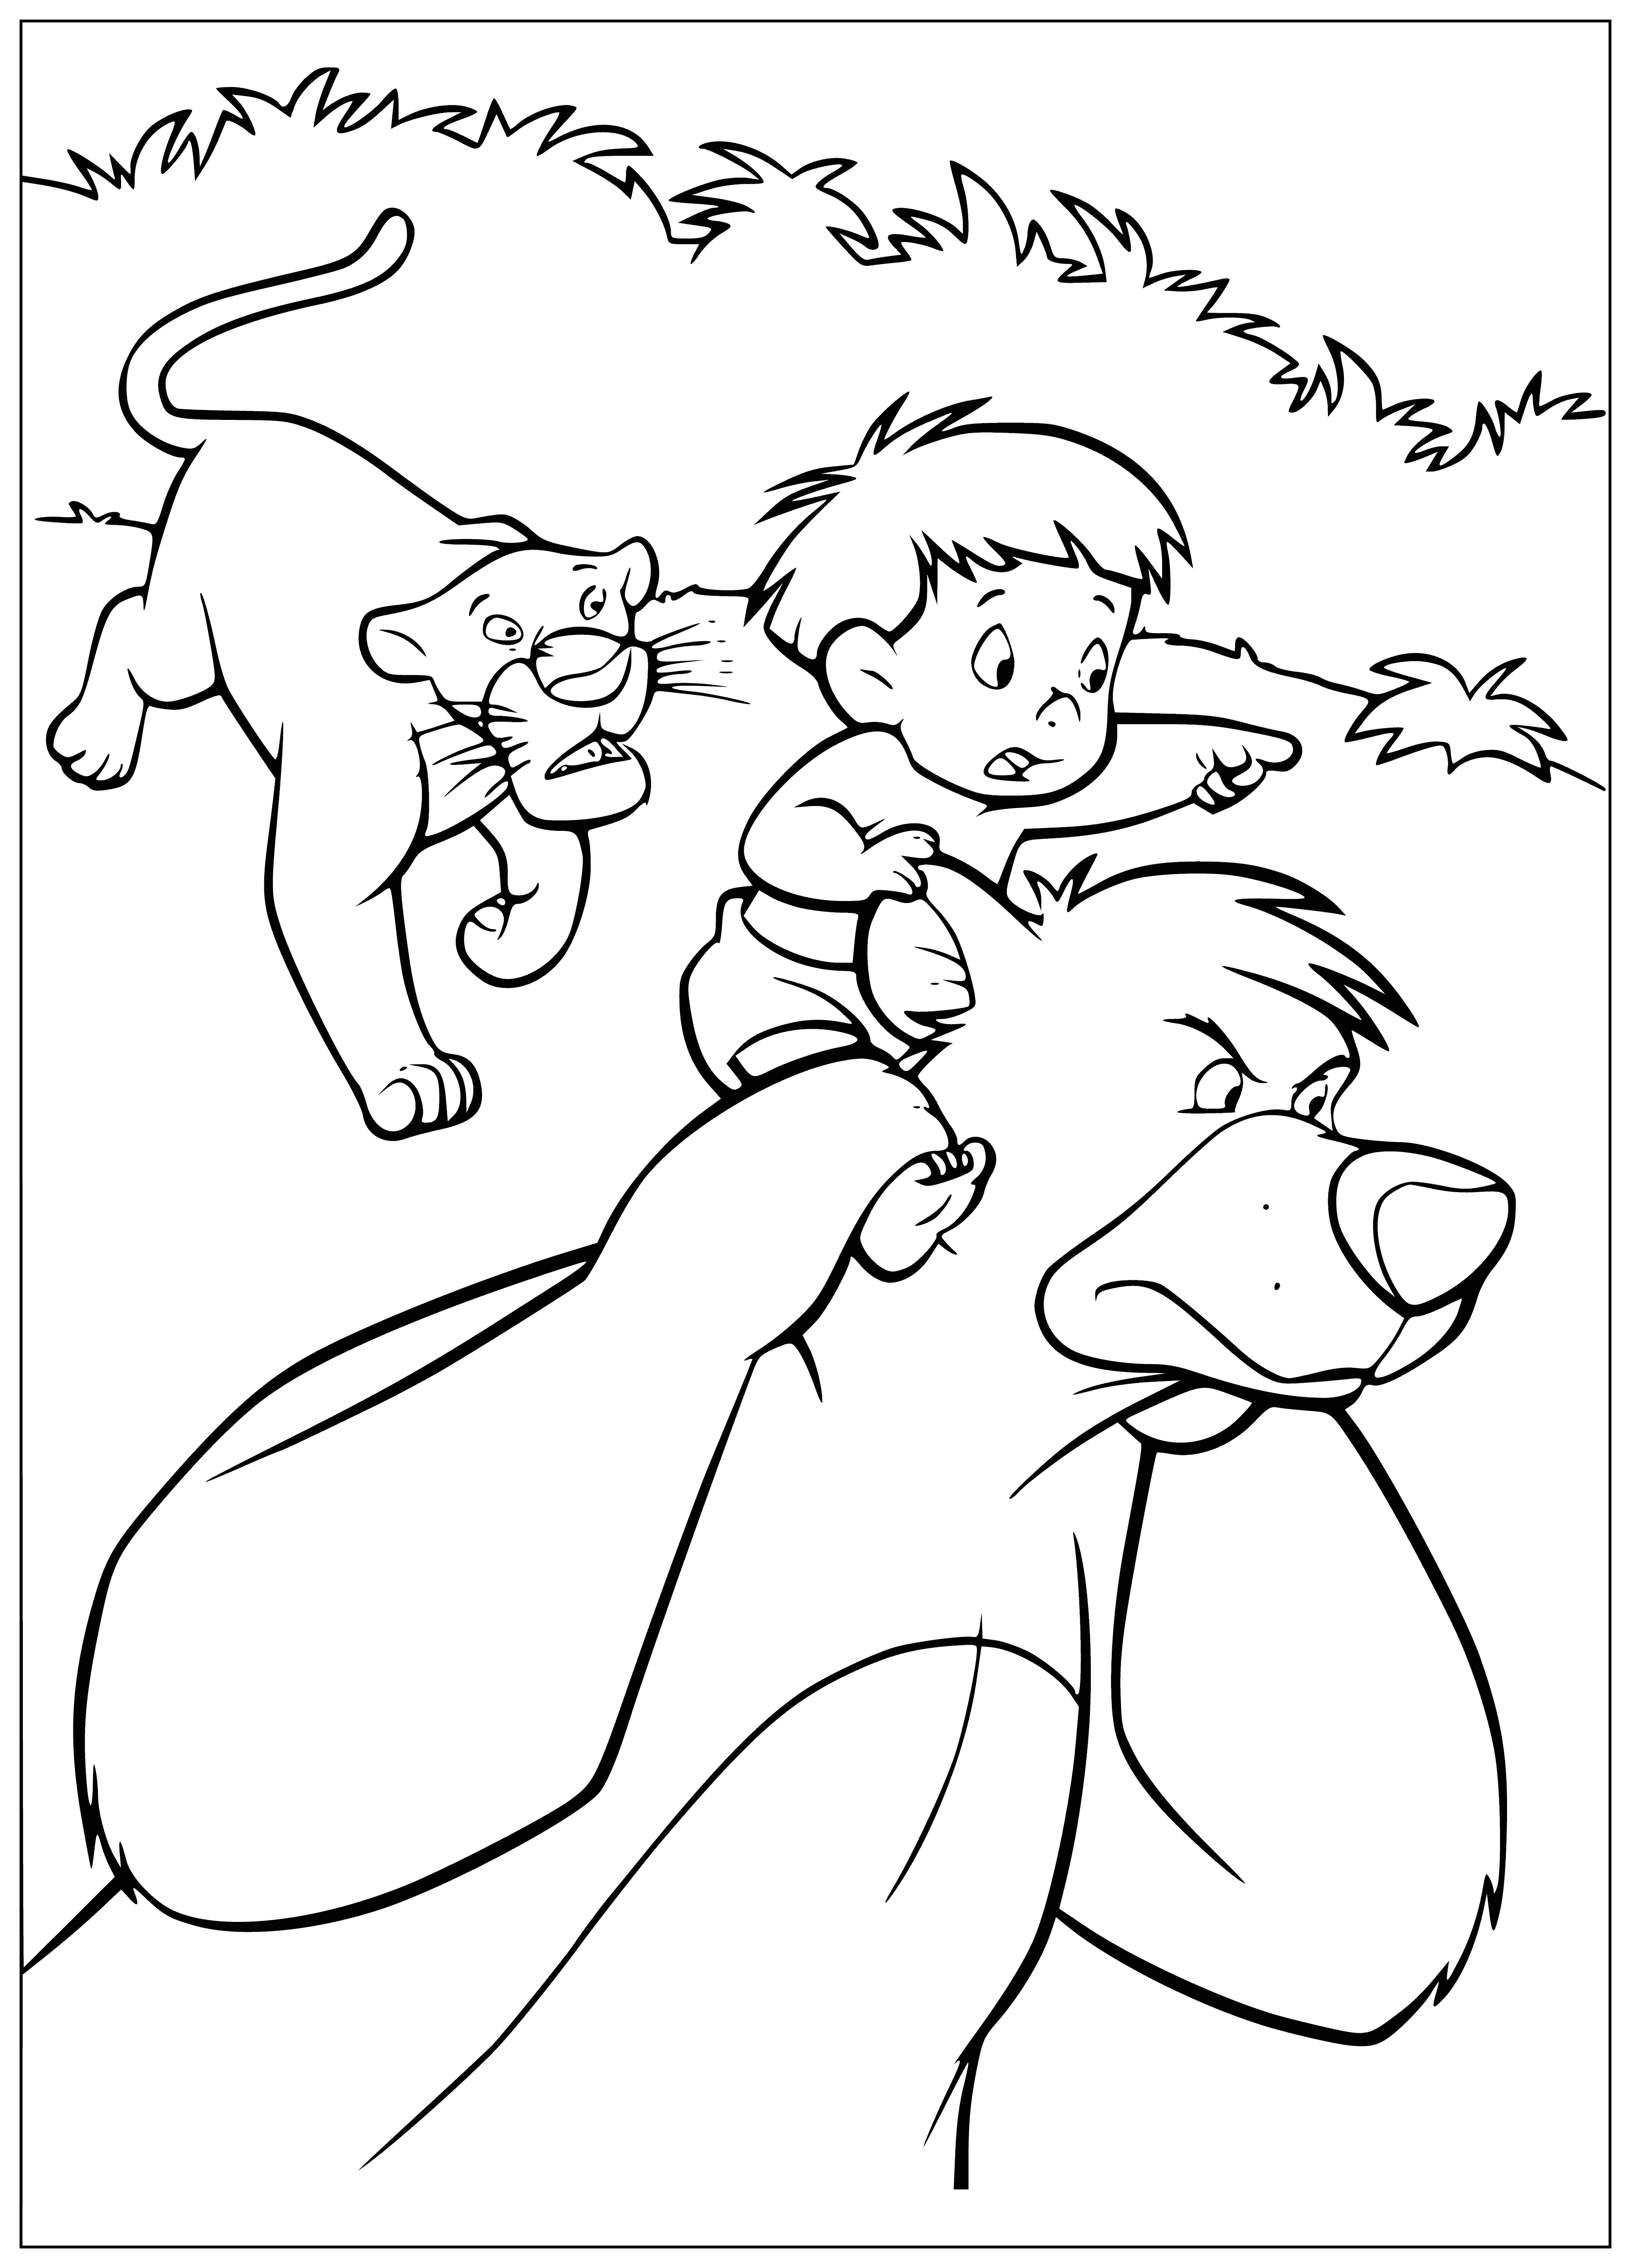 Mowgli is in danger coloring page